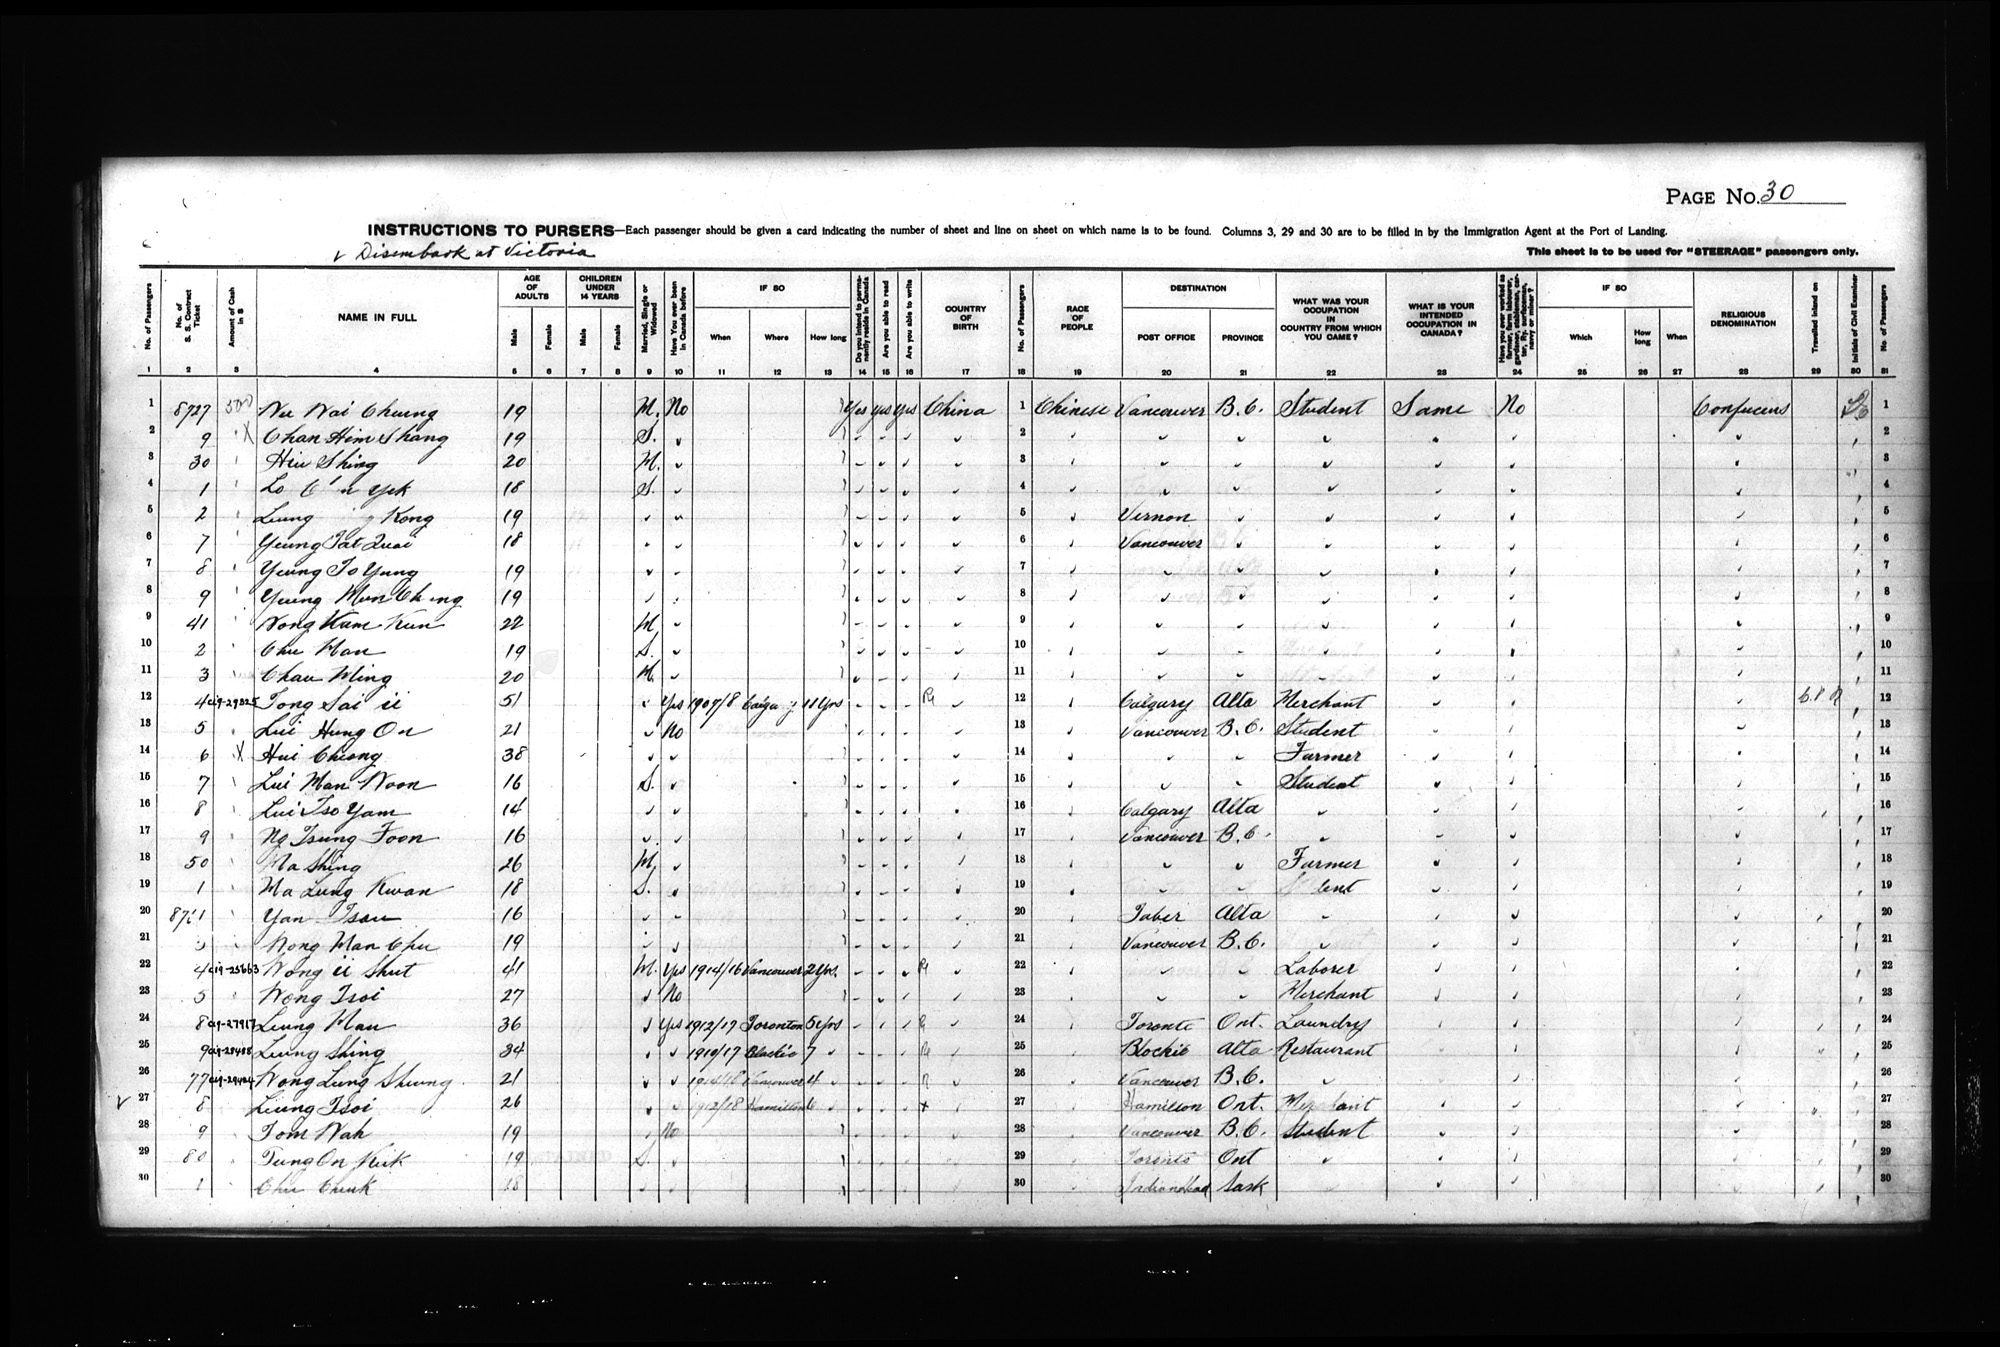 Digitized page of Passenger Lists for Image No.: CANIMM1913PLIST_0000408296-00279